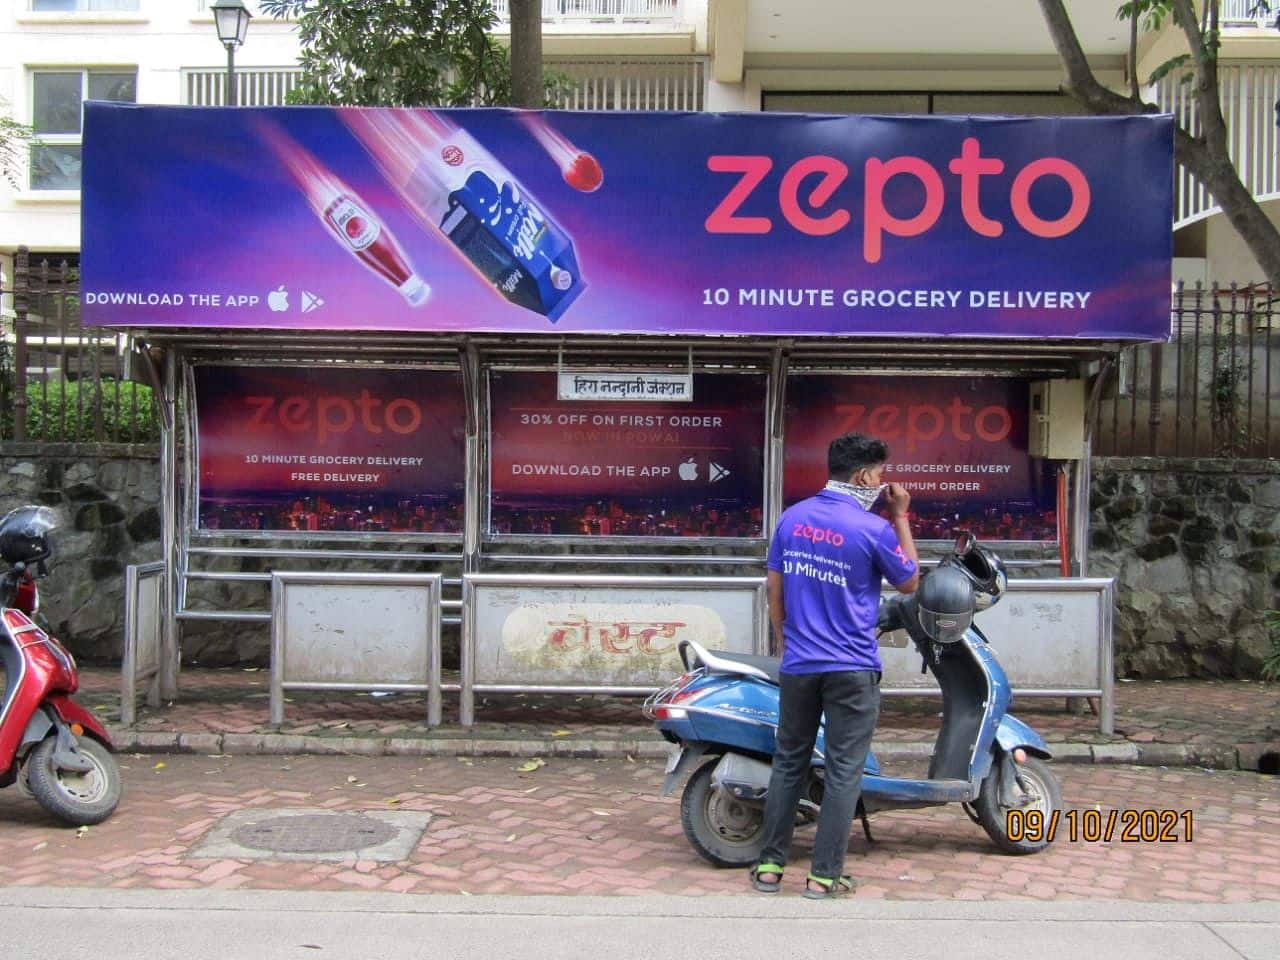 Zepto, a 10 -minute grocery delivery app, raises $200 million at a valuation of $900 million